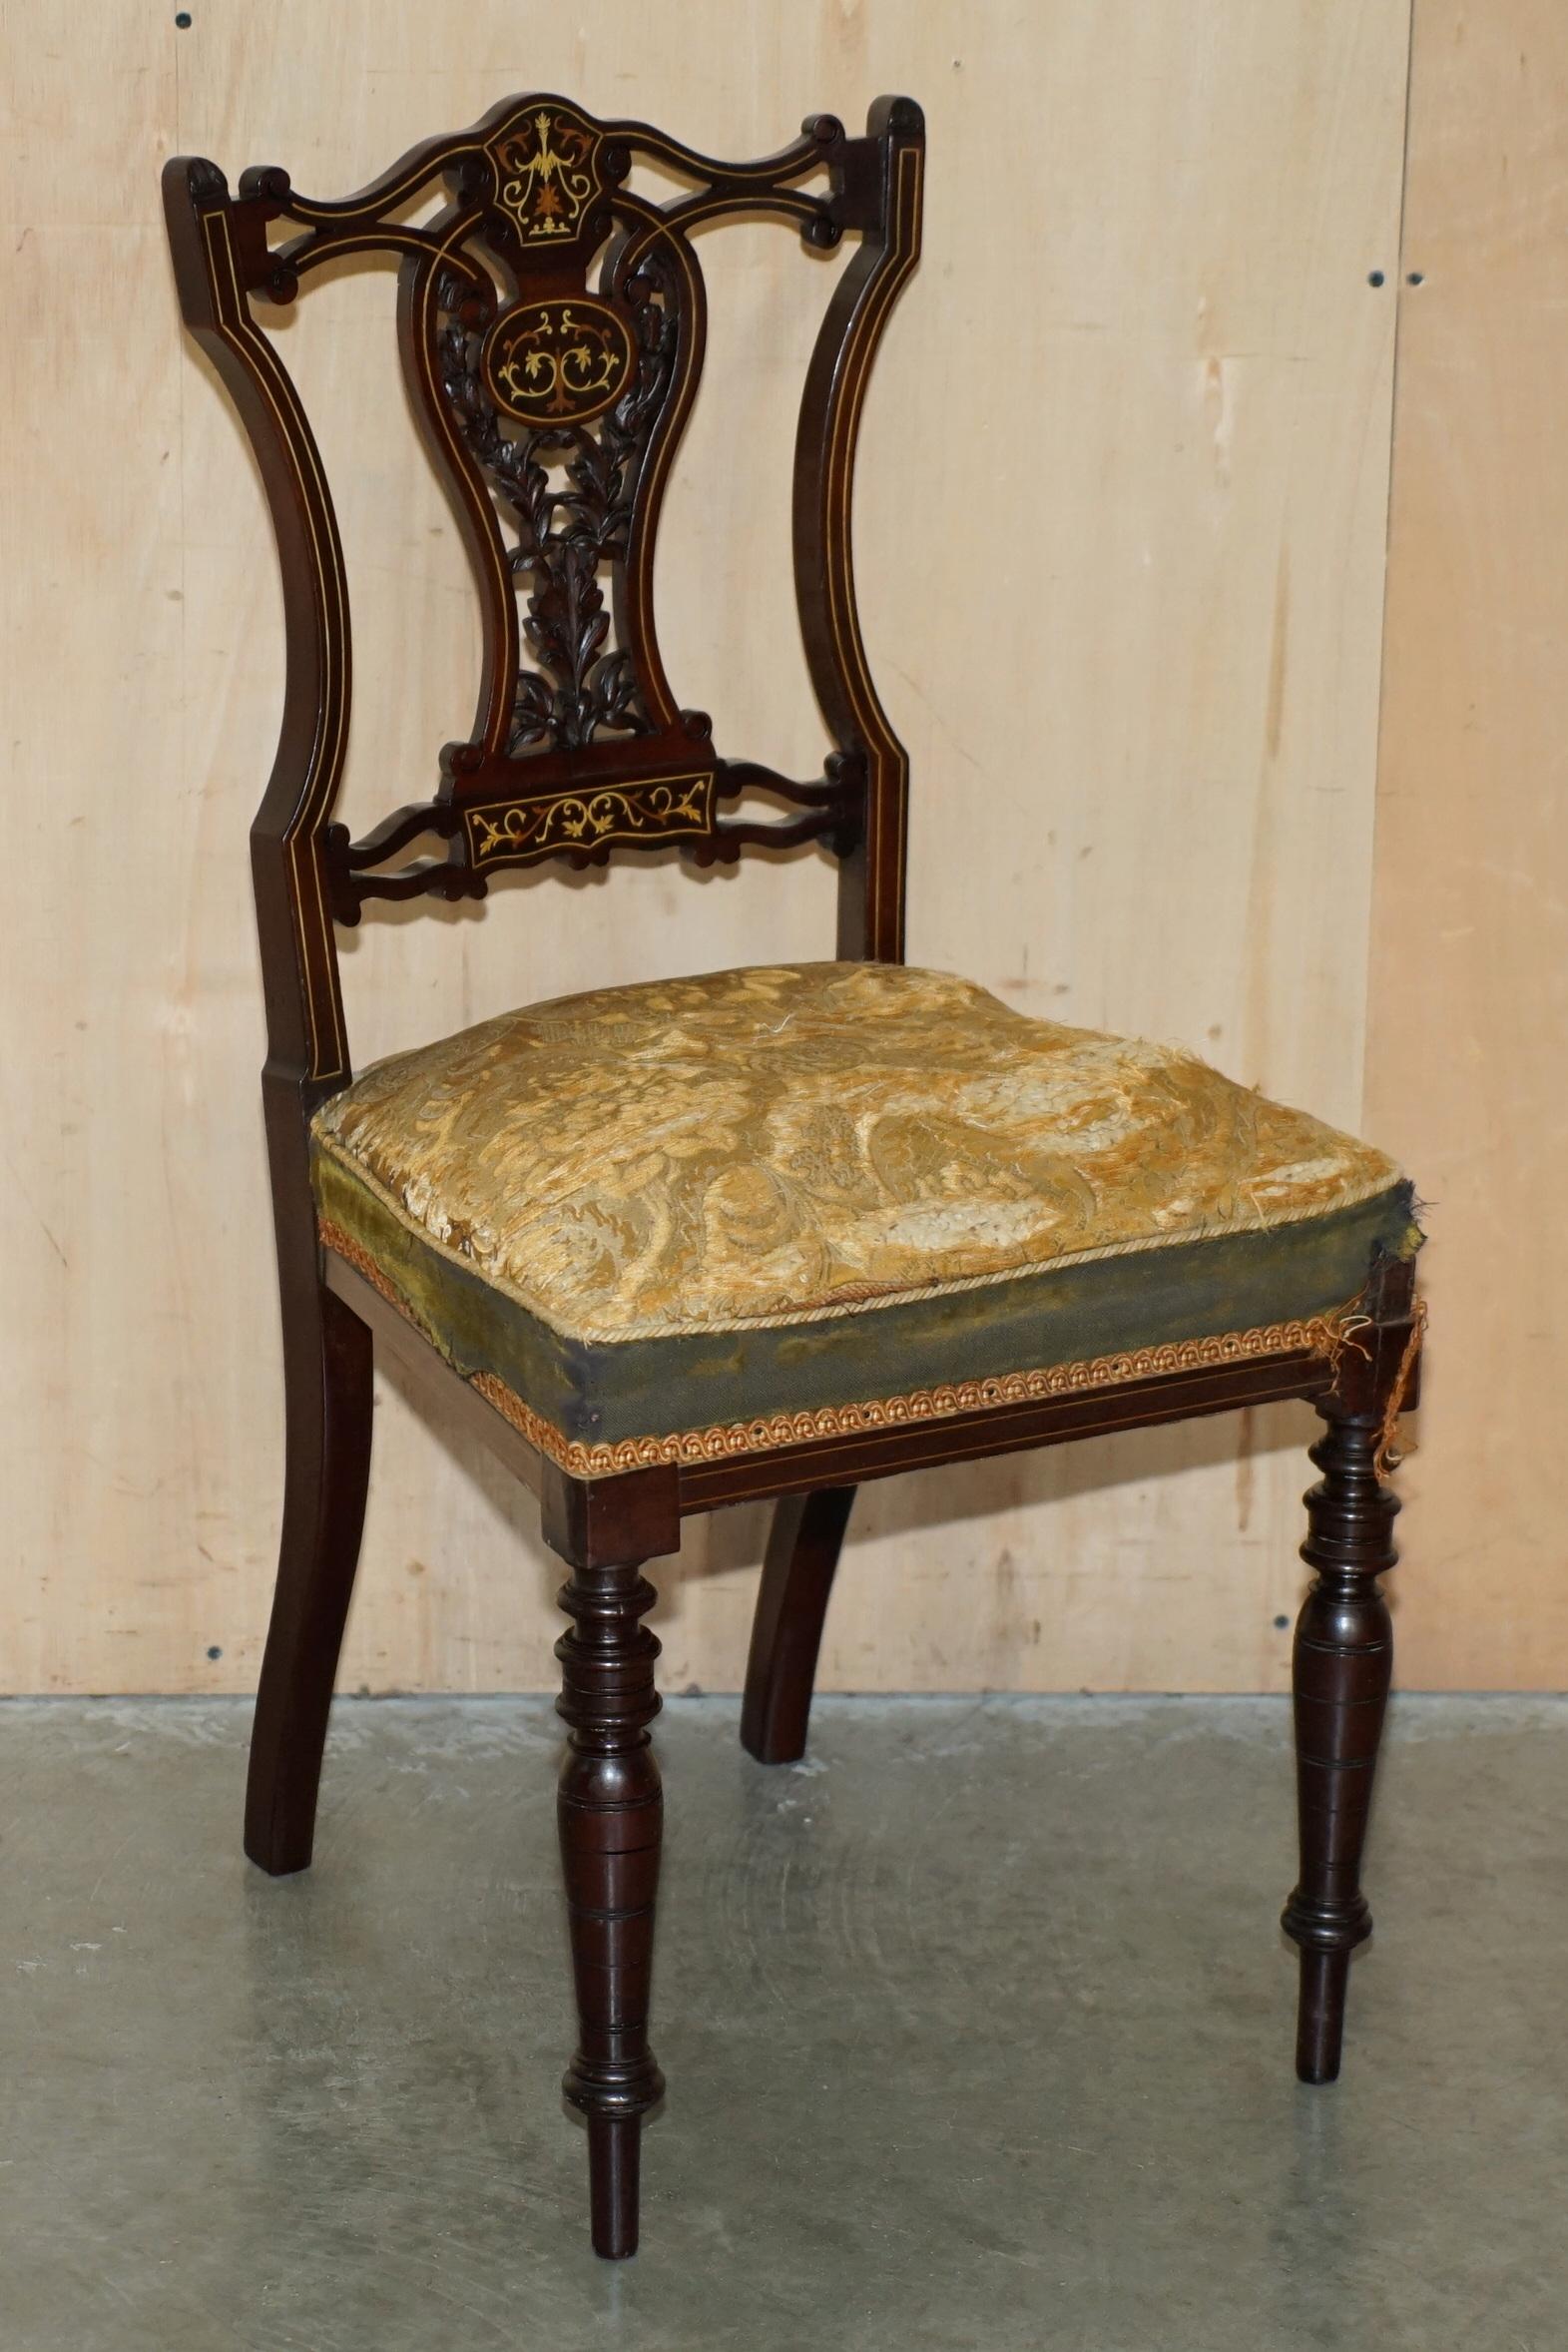 PAiR OF ANTIQUE VICTORIAN HARDWOOD SALON CHAIRS WITH STUNNING INLAID BACK PANELS For Sale 7